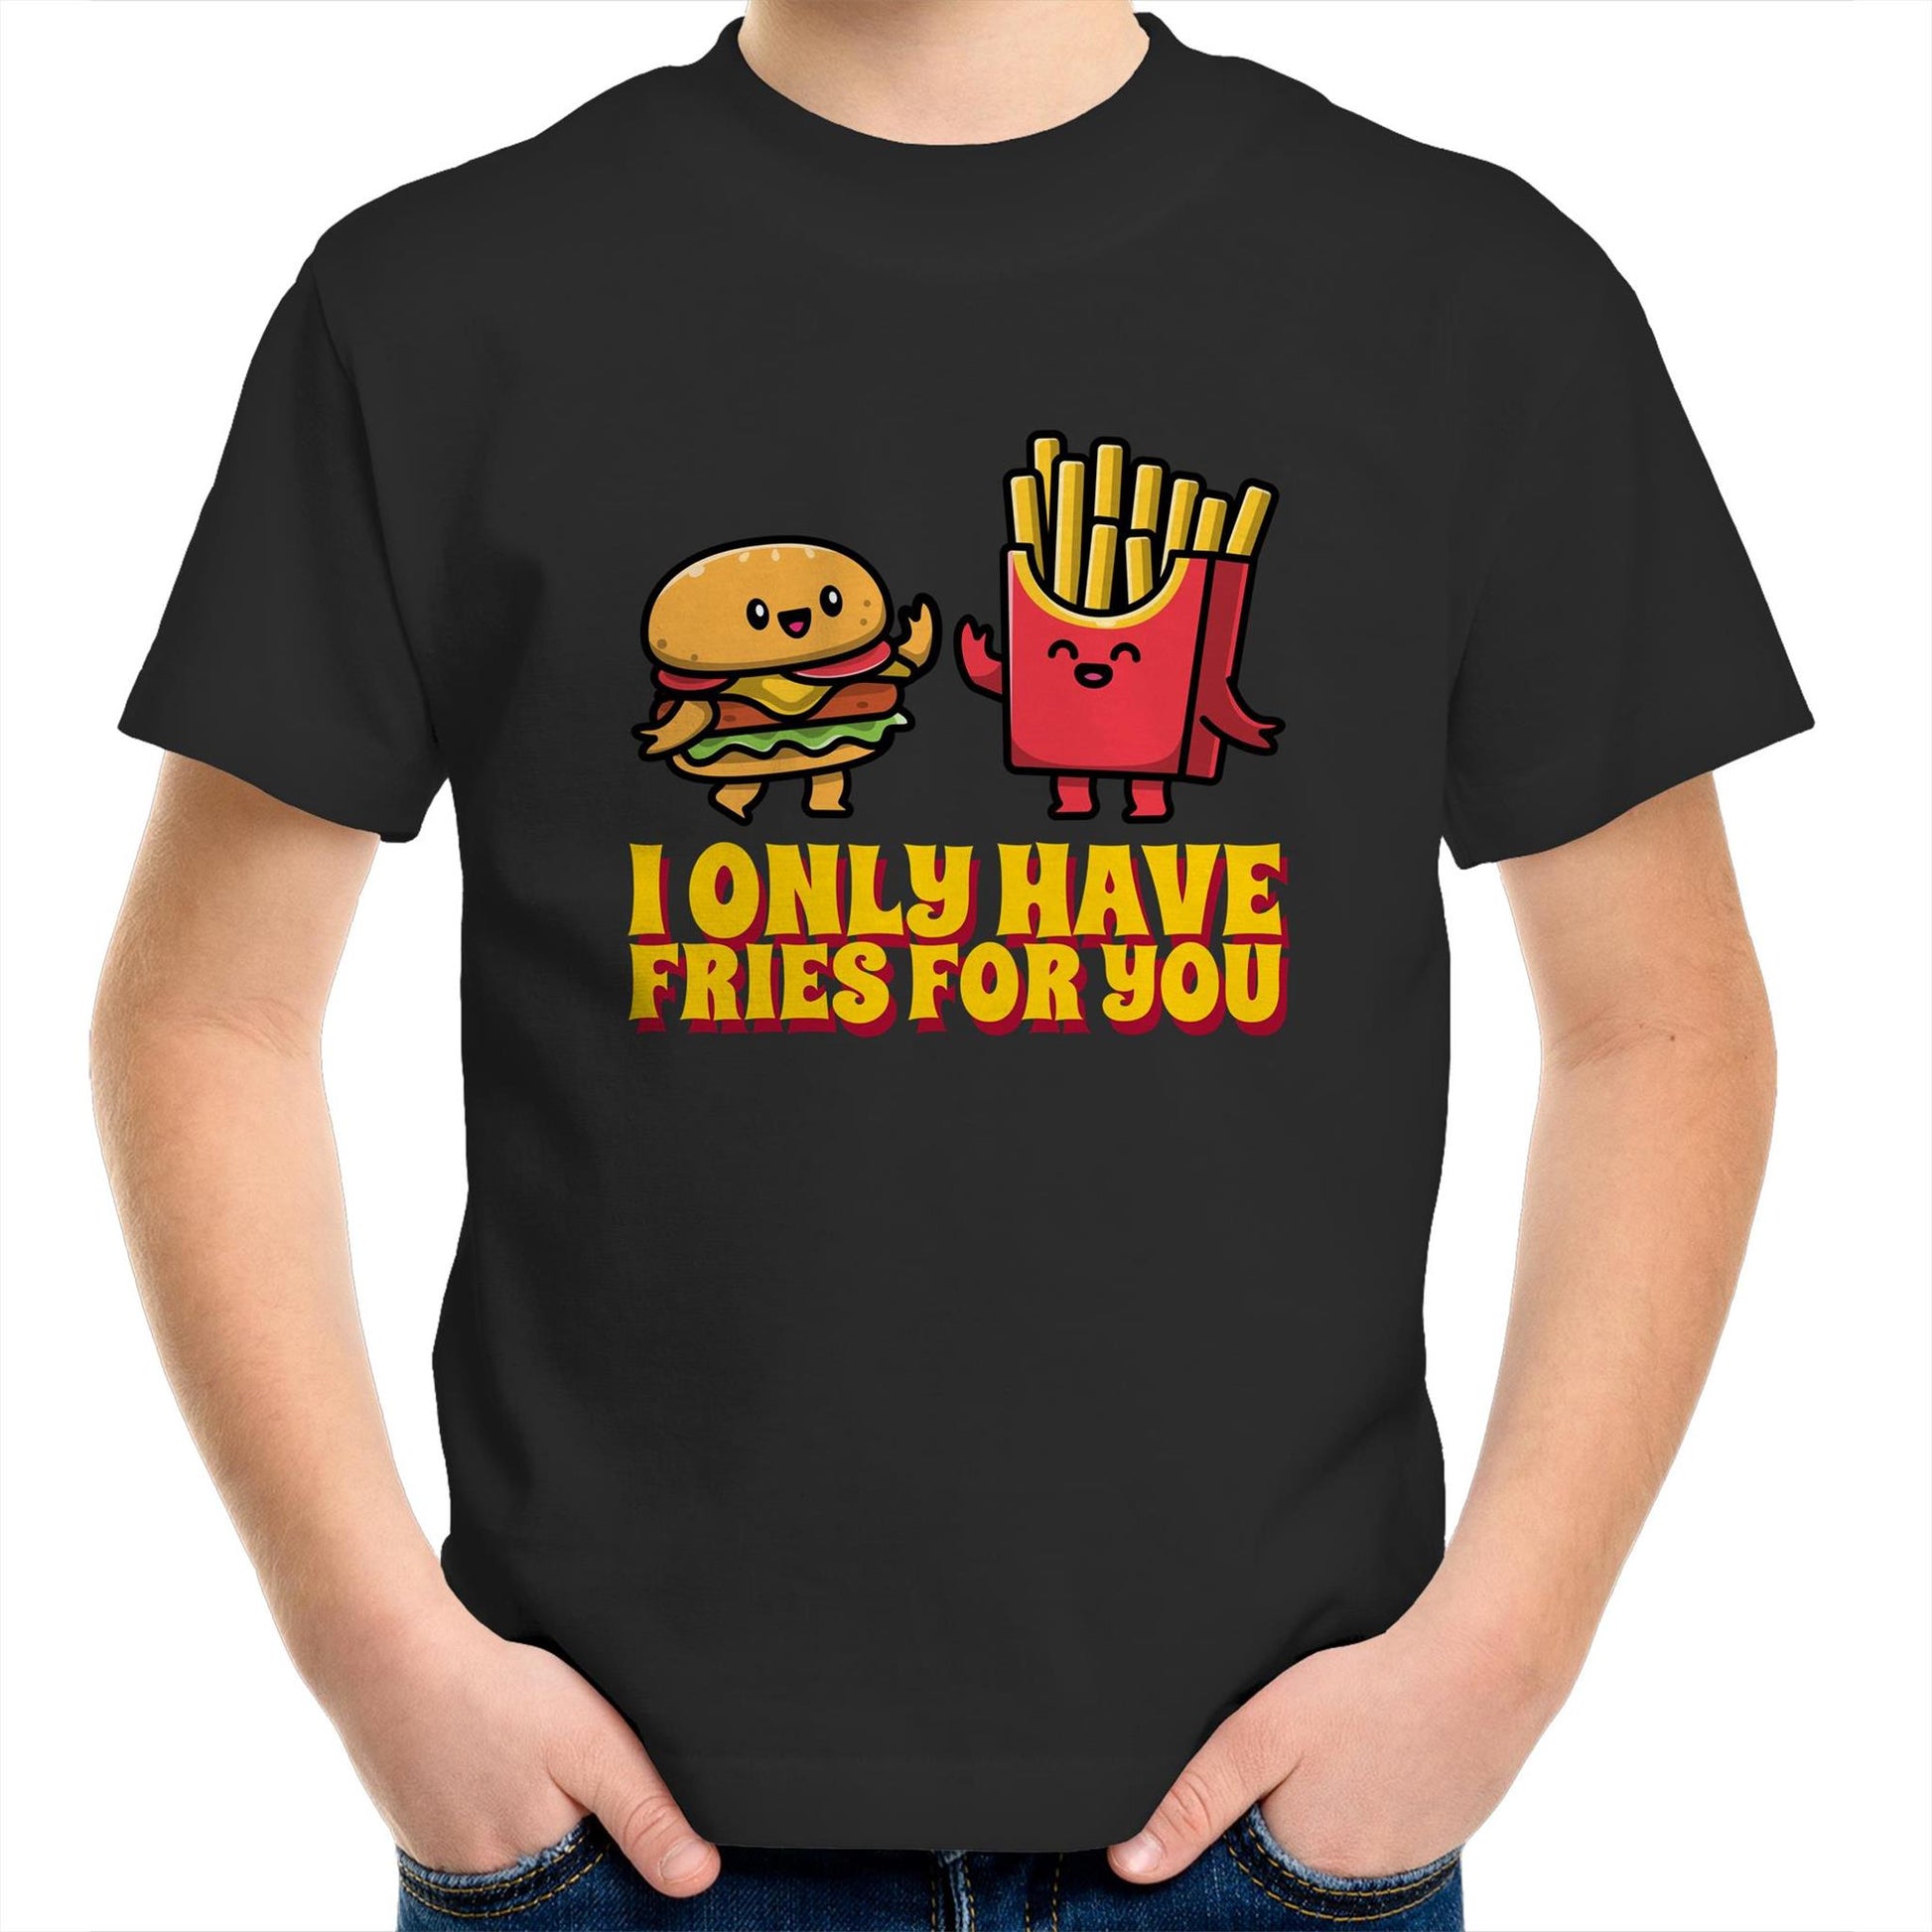 I Only Have Fries For You, Burger And Fries - Kids Youth T-Shirt Black Kids Youth T-shirt